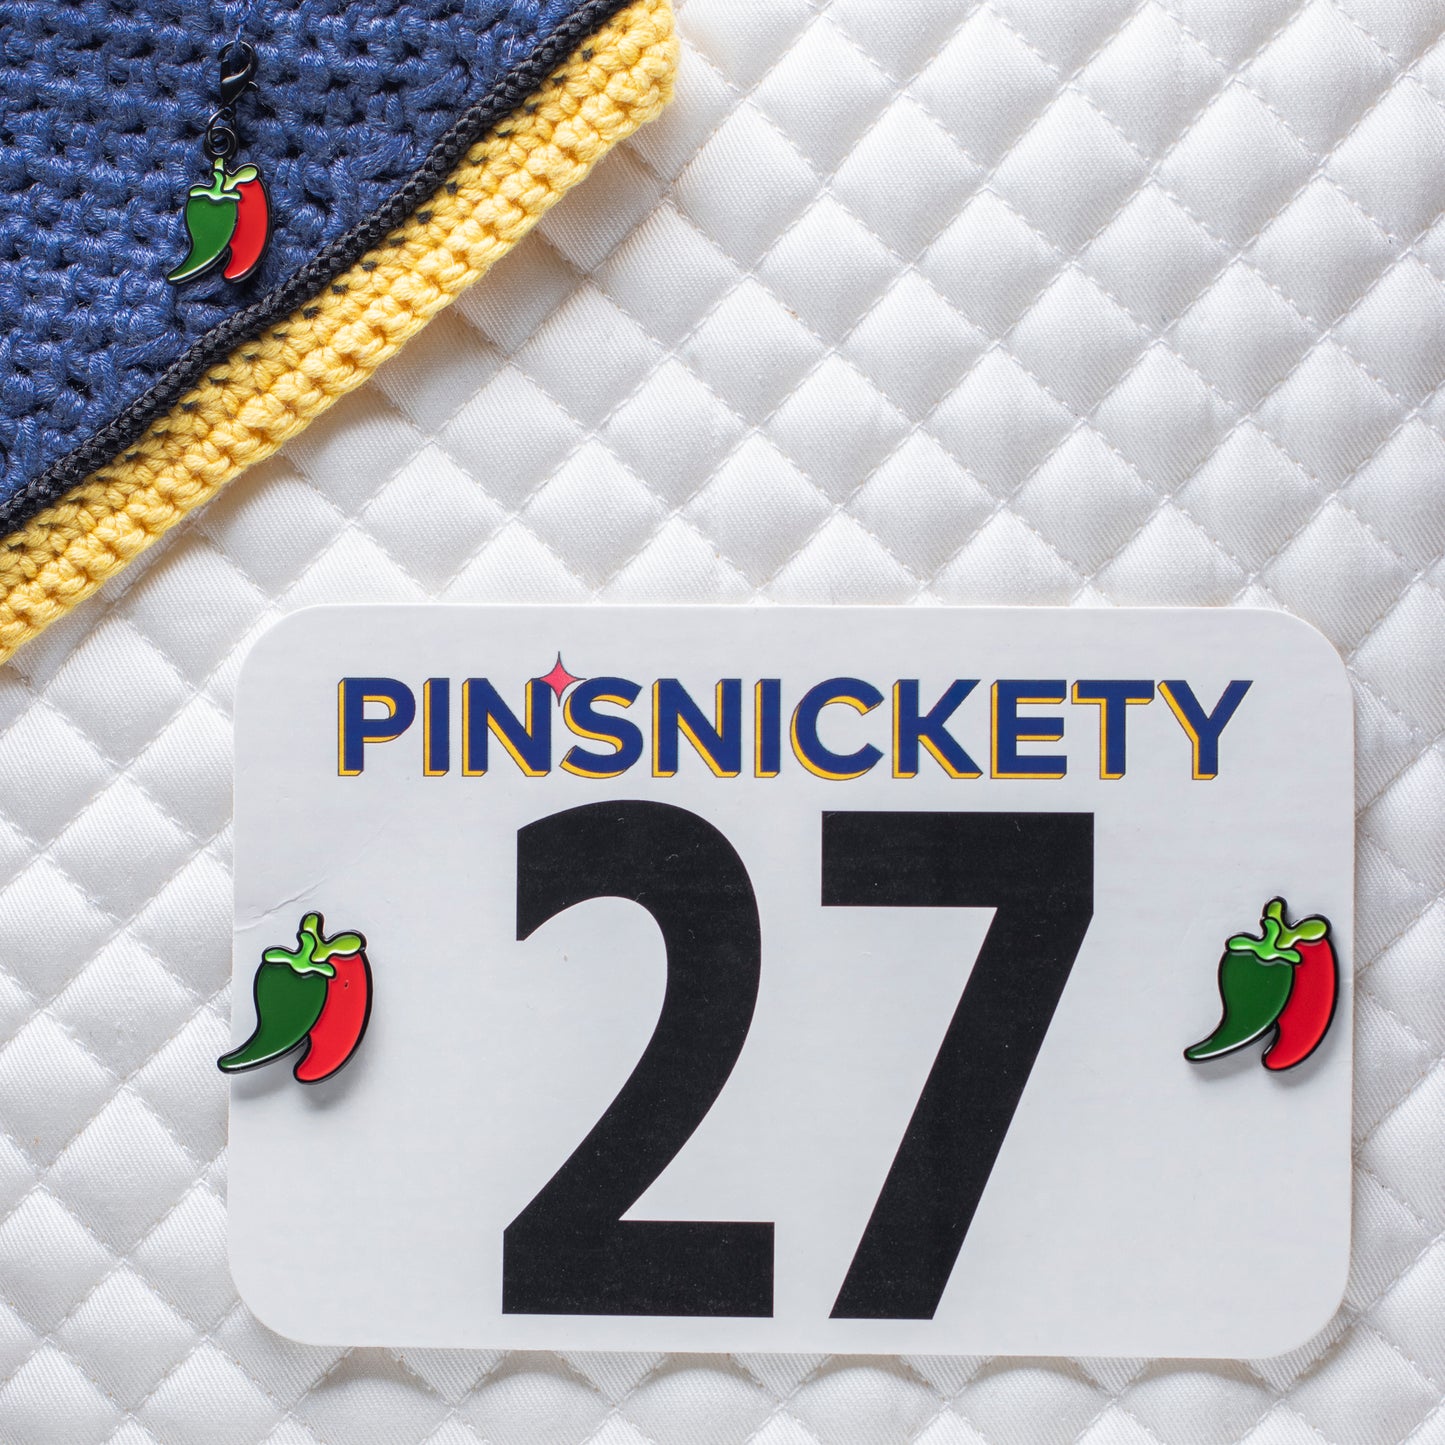 pinsnickety chili peppers set with braid and bridle charm on a bonnet and chili peppers horse show number pins on a saddle pad